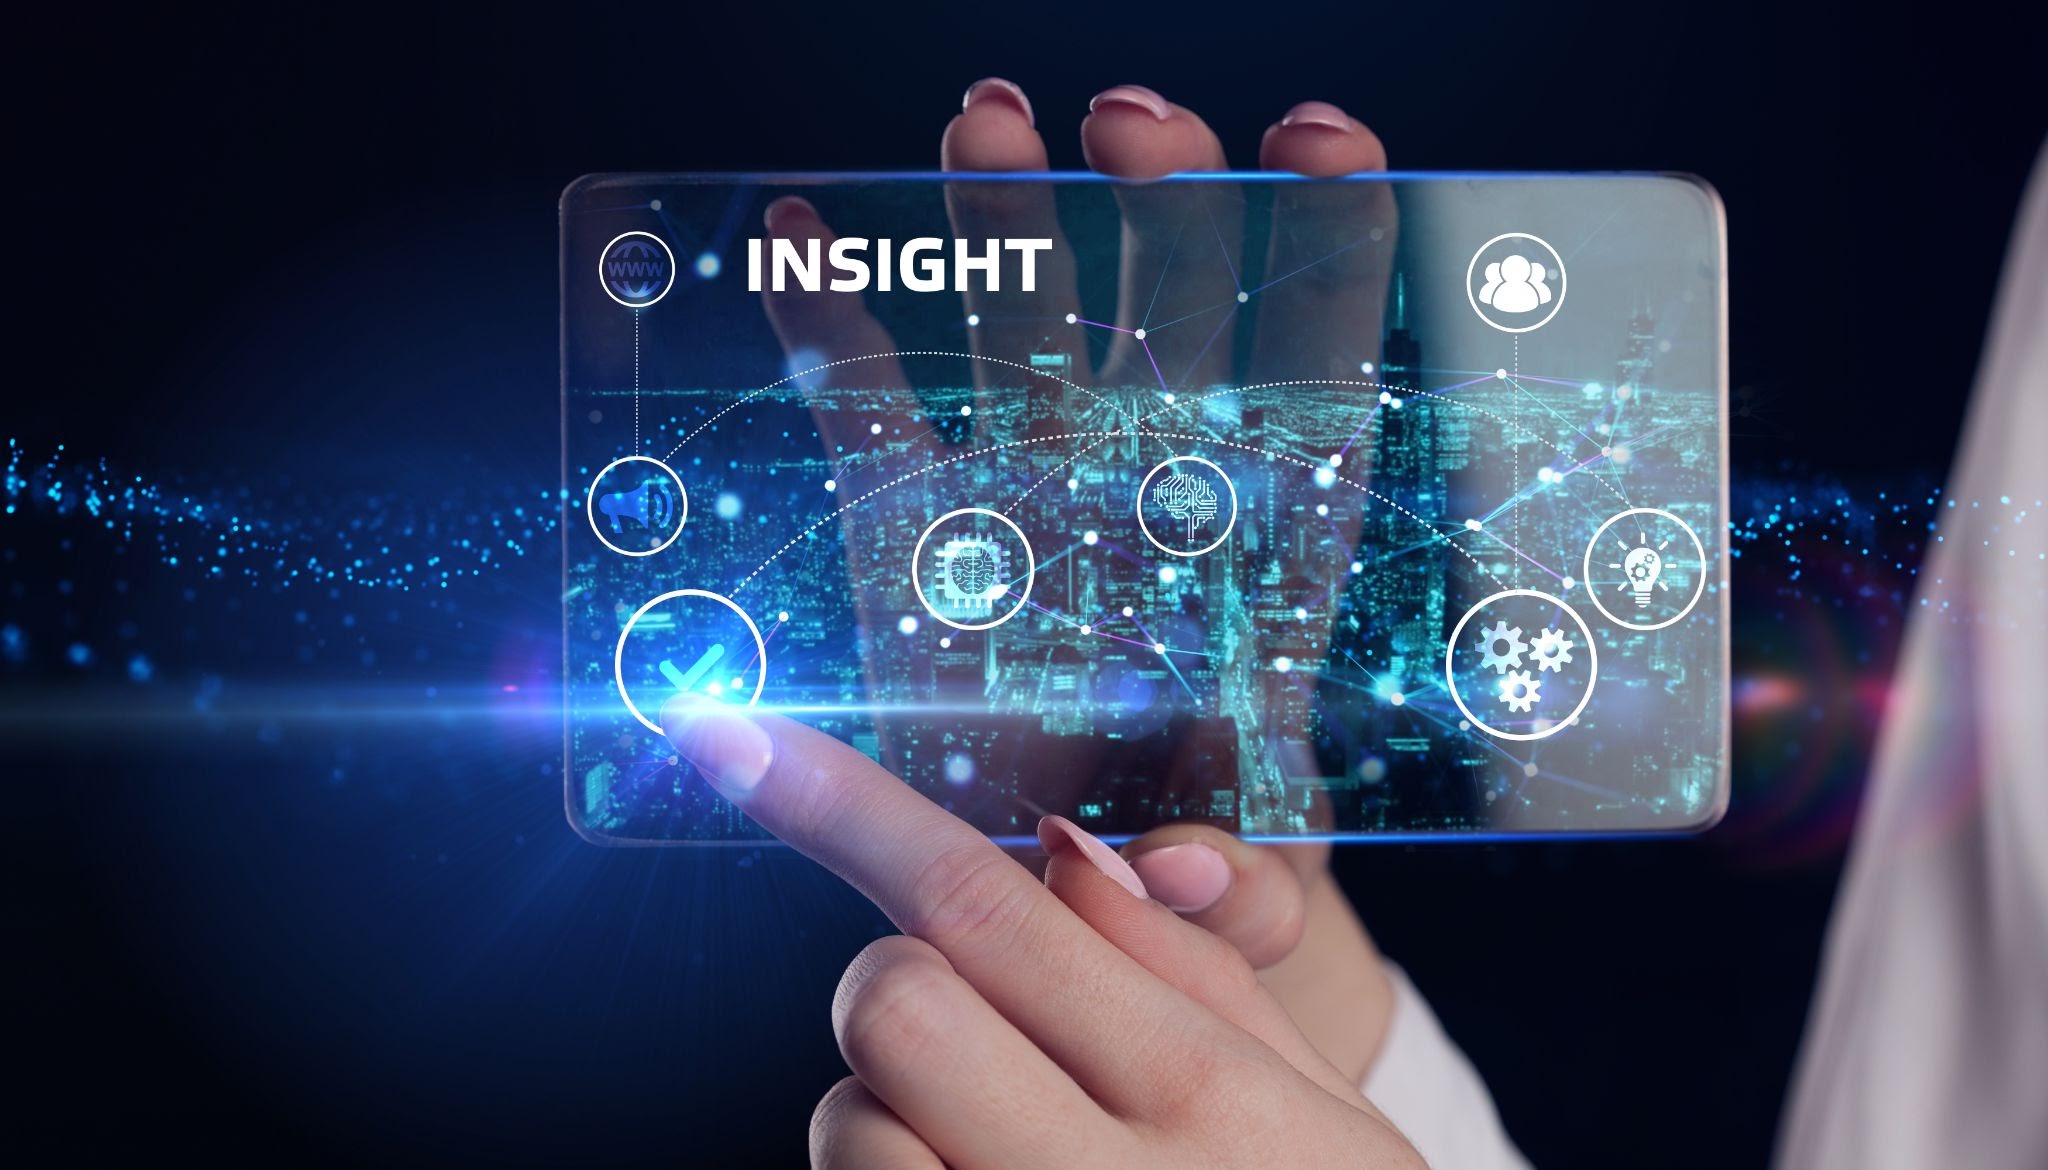 Sales data analytics can provide great business insights